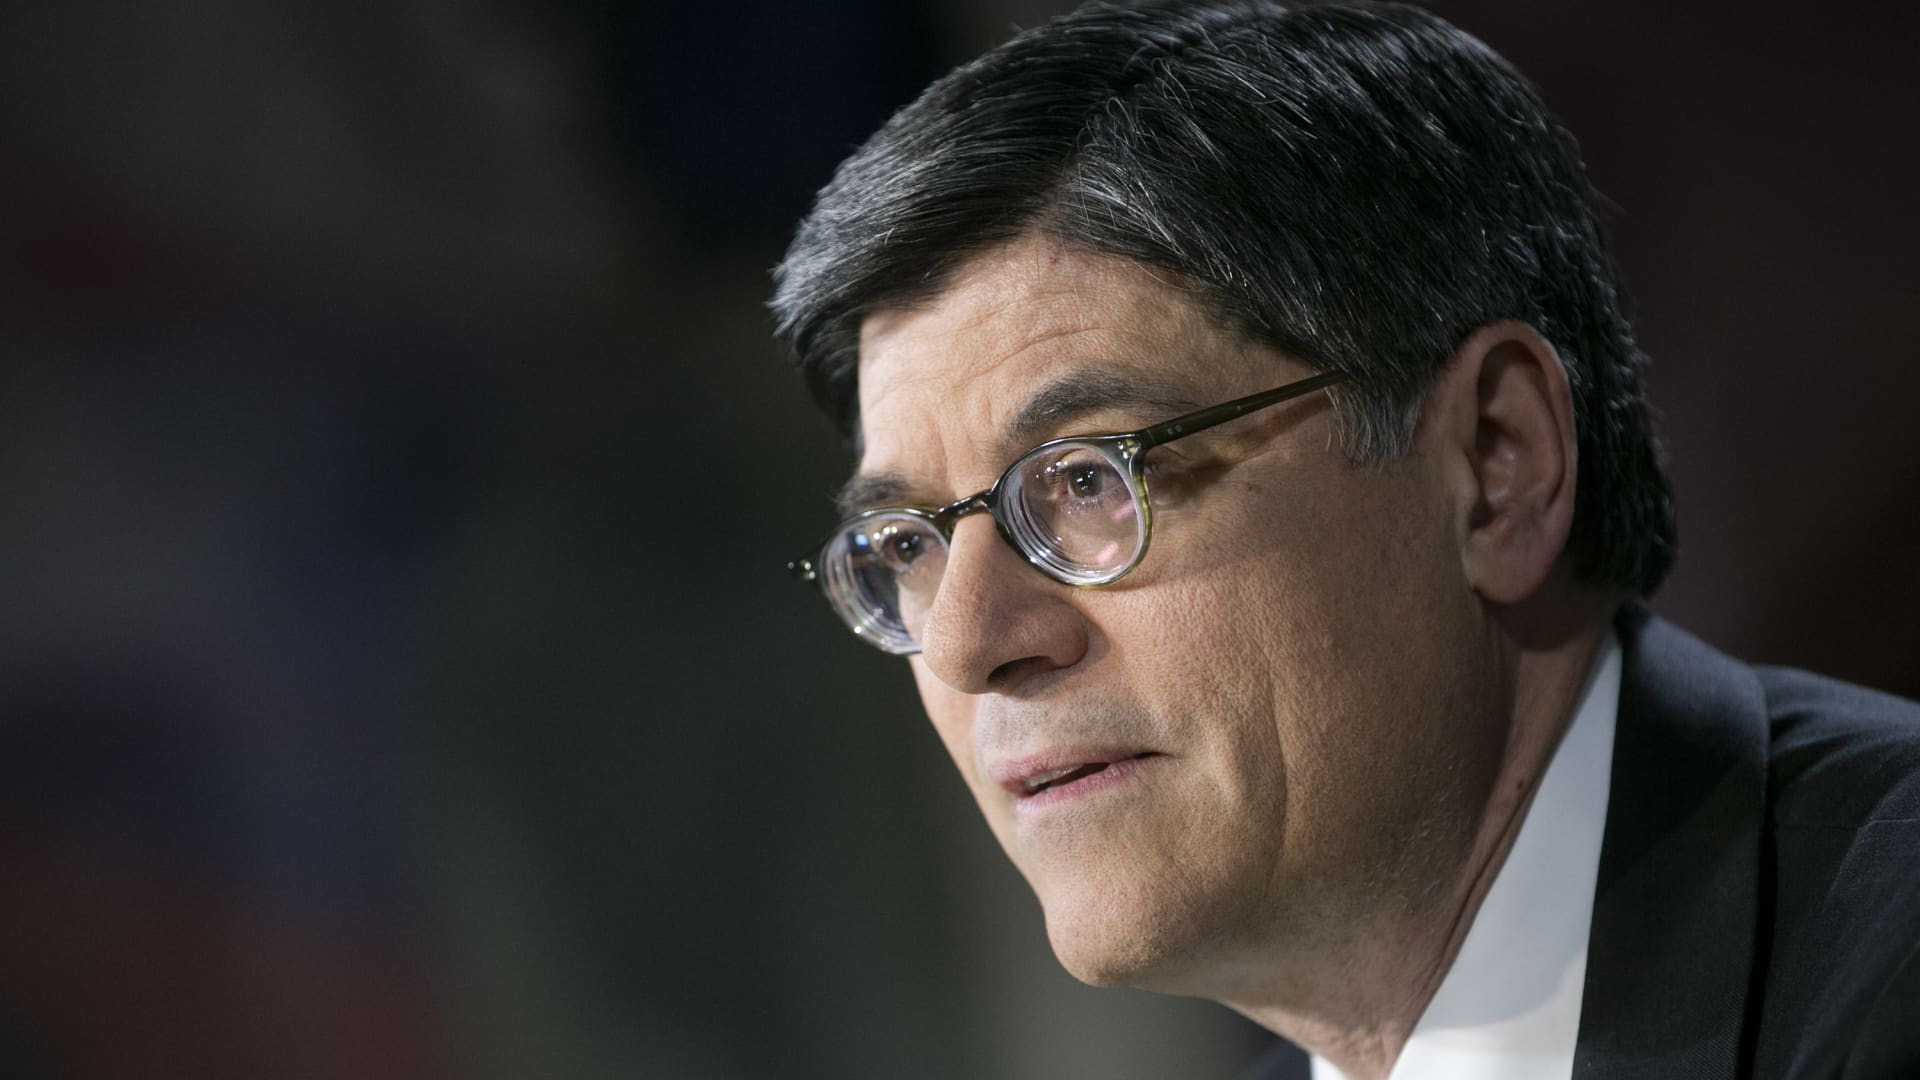 Jack Lew to press Germany to boost domestic demand